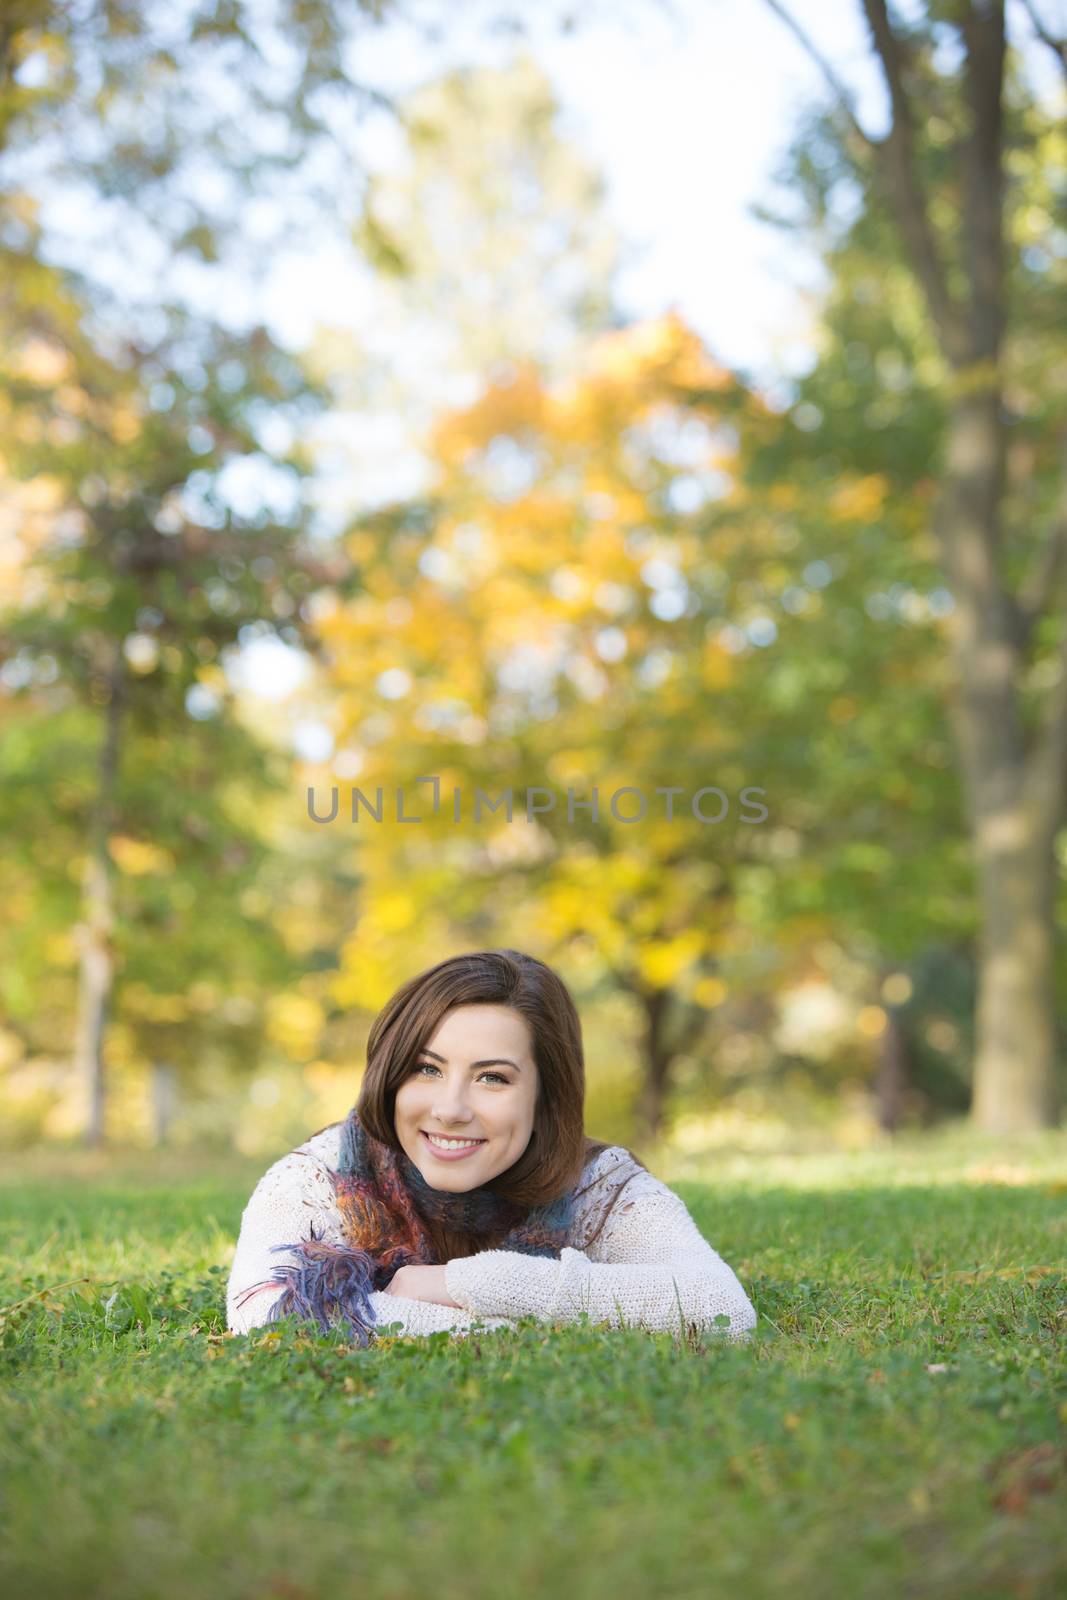 Smiling Teen Outdoors by Creatista